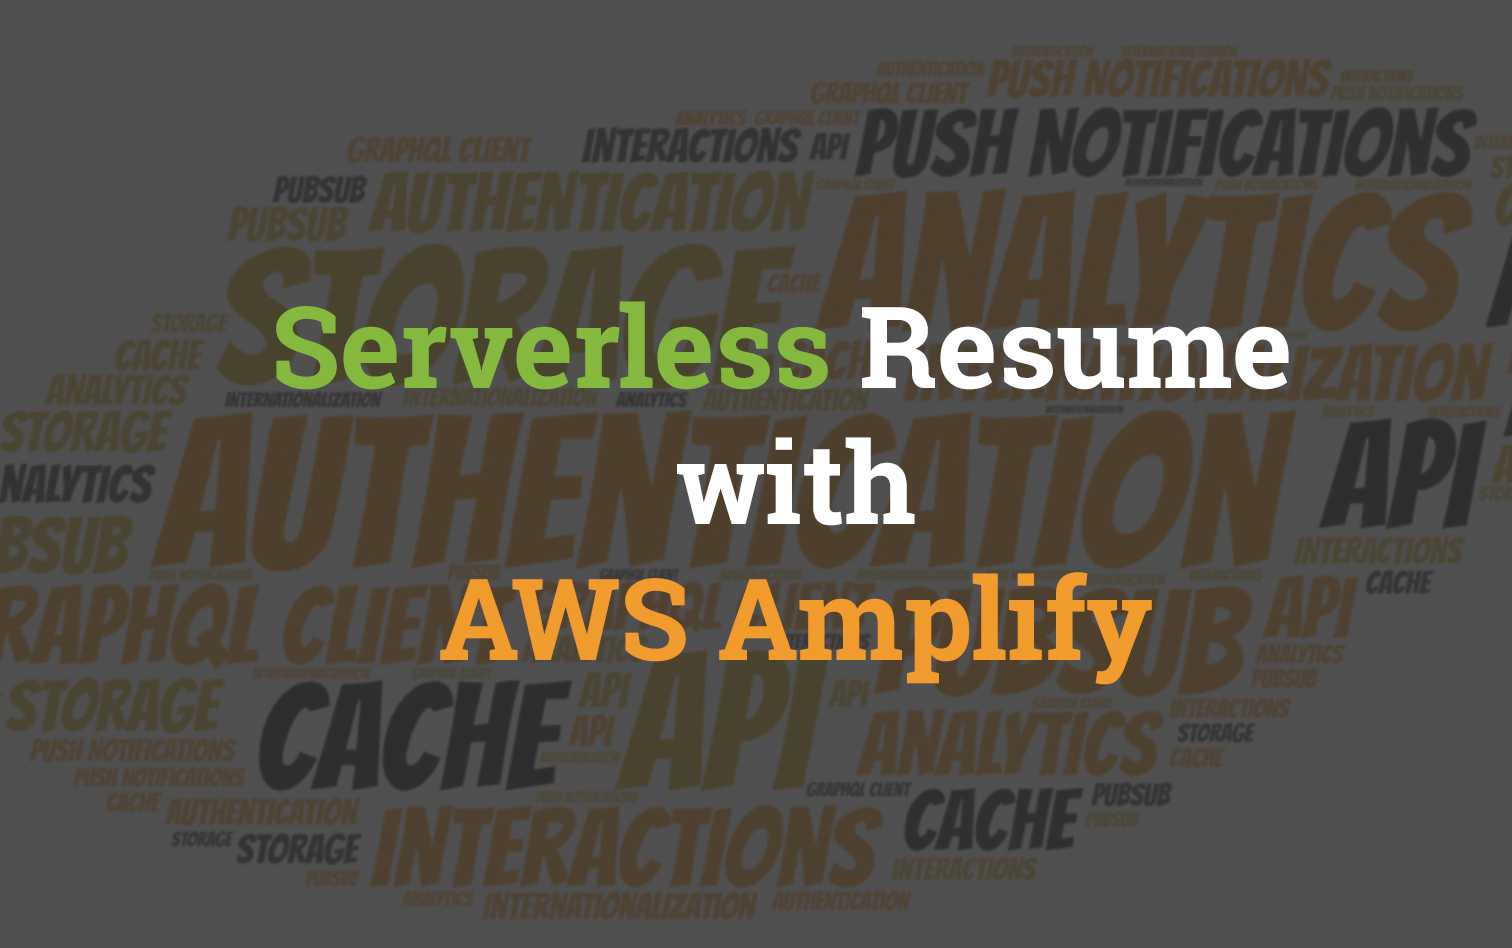 Building a Serverless Resume with AWS Amplify